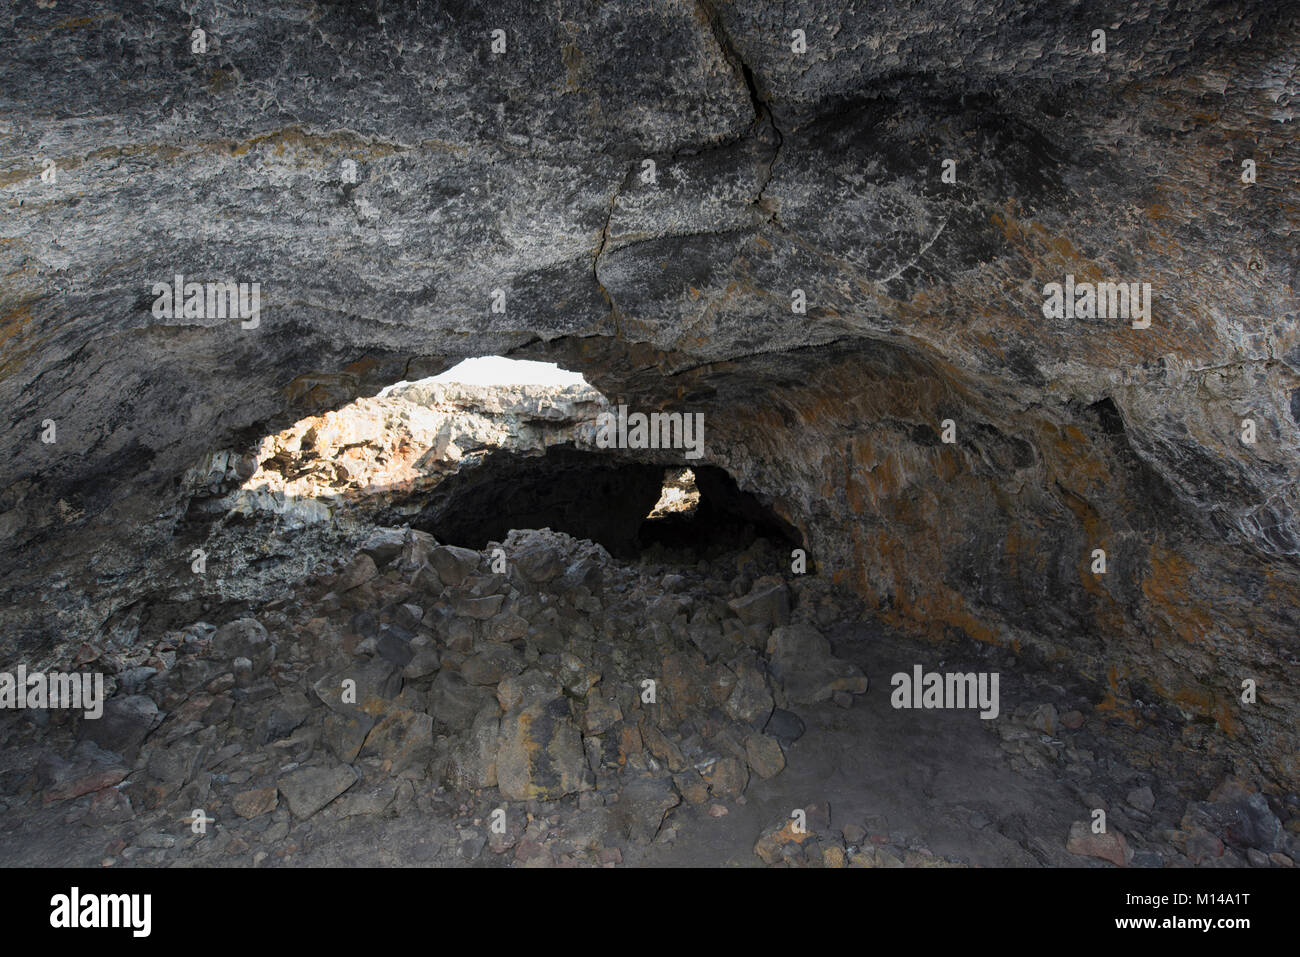 Inside the Indian Tunnel, a partially collapsed lava tube at Craters of the Moon Natl. Monument, Idaho, USA. Stock Photo